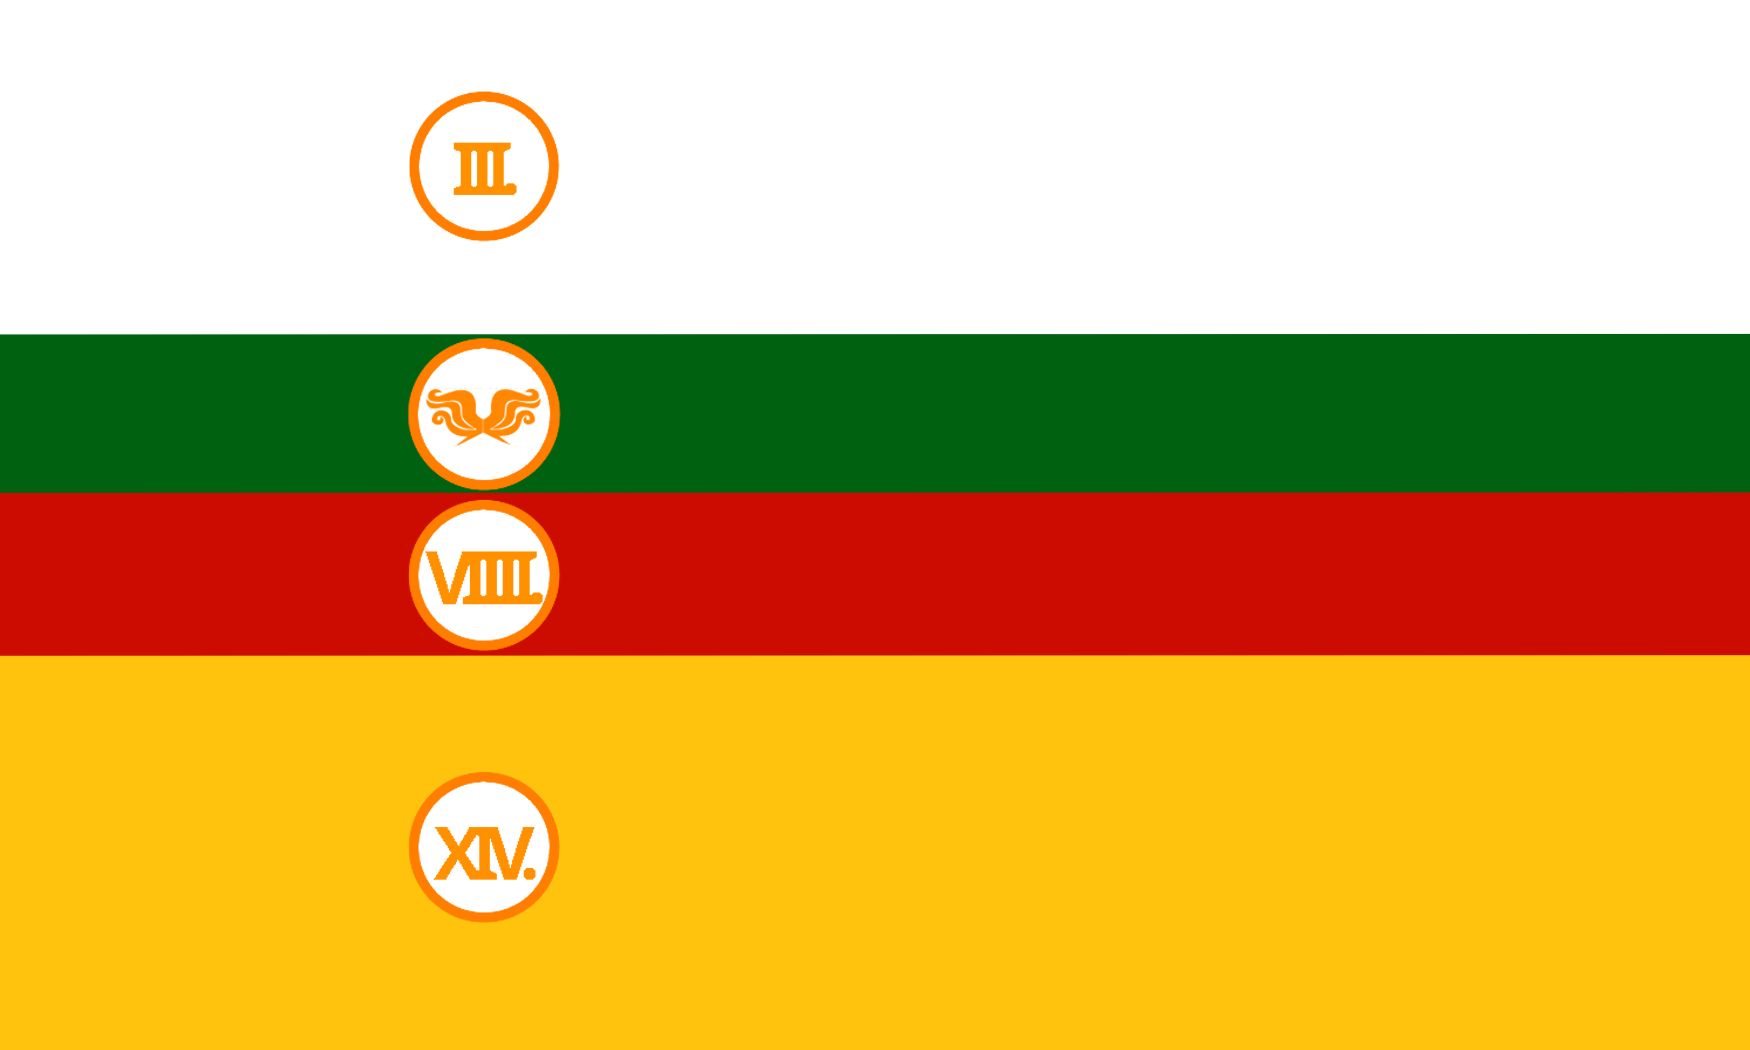 A flag with four horizontal stripes: white, green, red and yellow. The middle two are narrower. In each stripe about a third to the left there is a circle with an orange border. in the circle there are in order: roman numeral III., hope symbol from homestuck, VIIII., XIV.